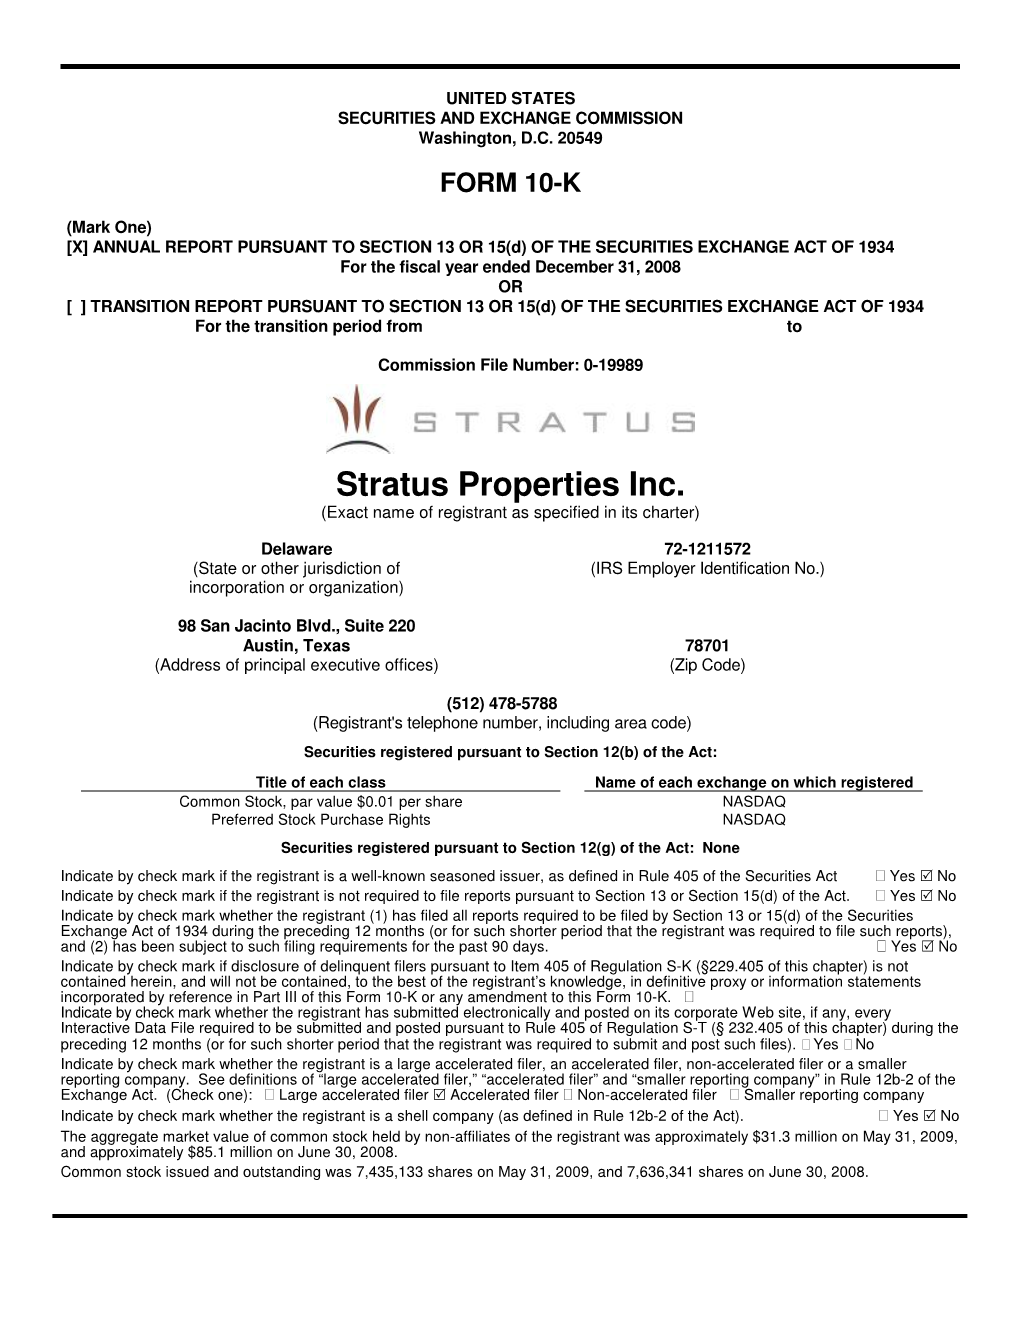 Stratus Properties Inc. (Exact Name of Registrant As Specified in Its Charter)